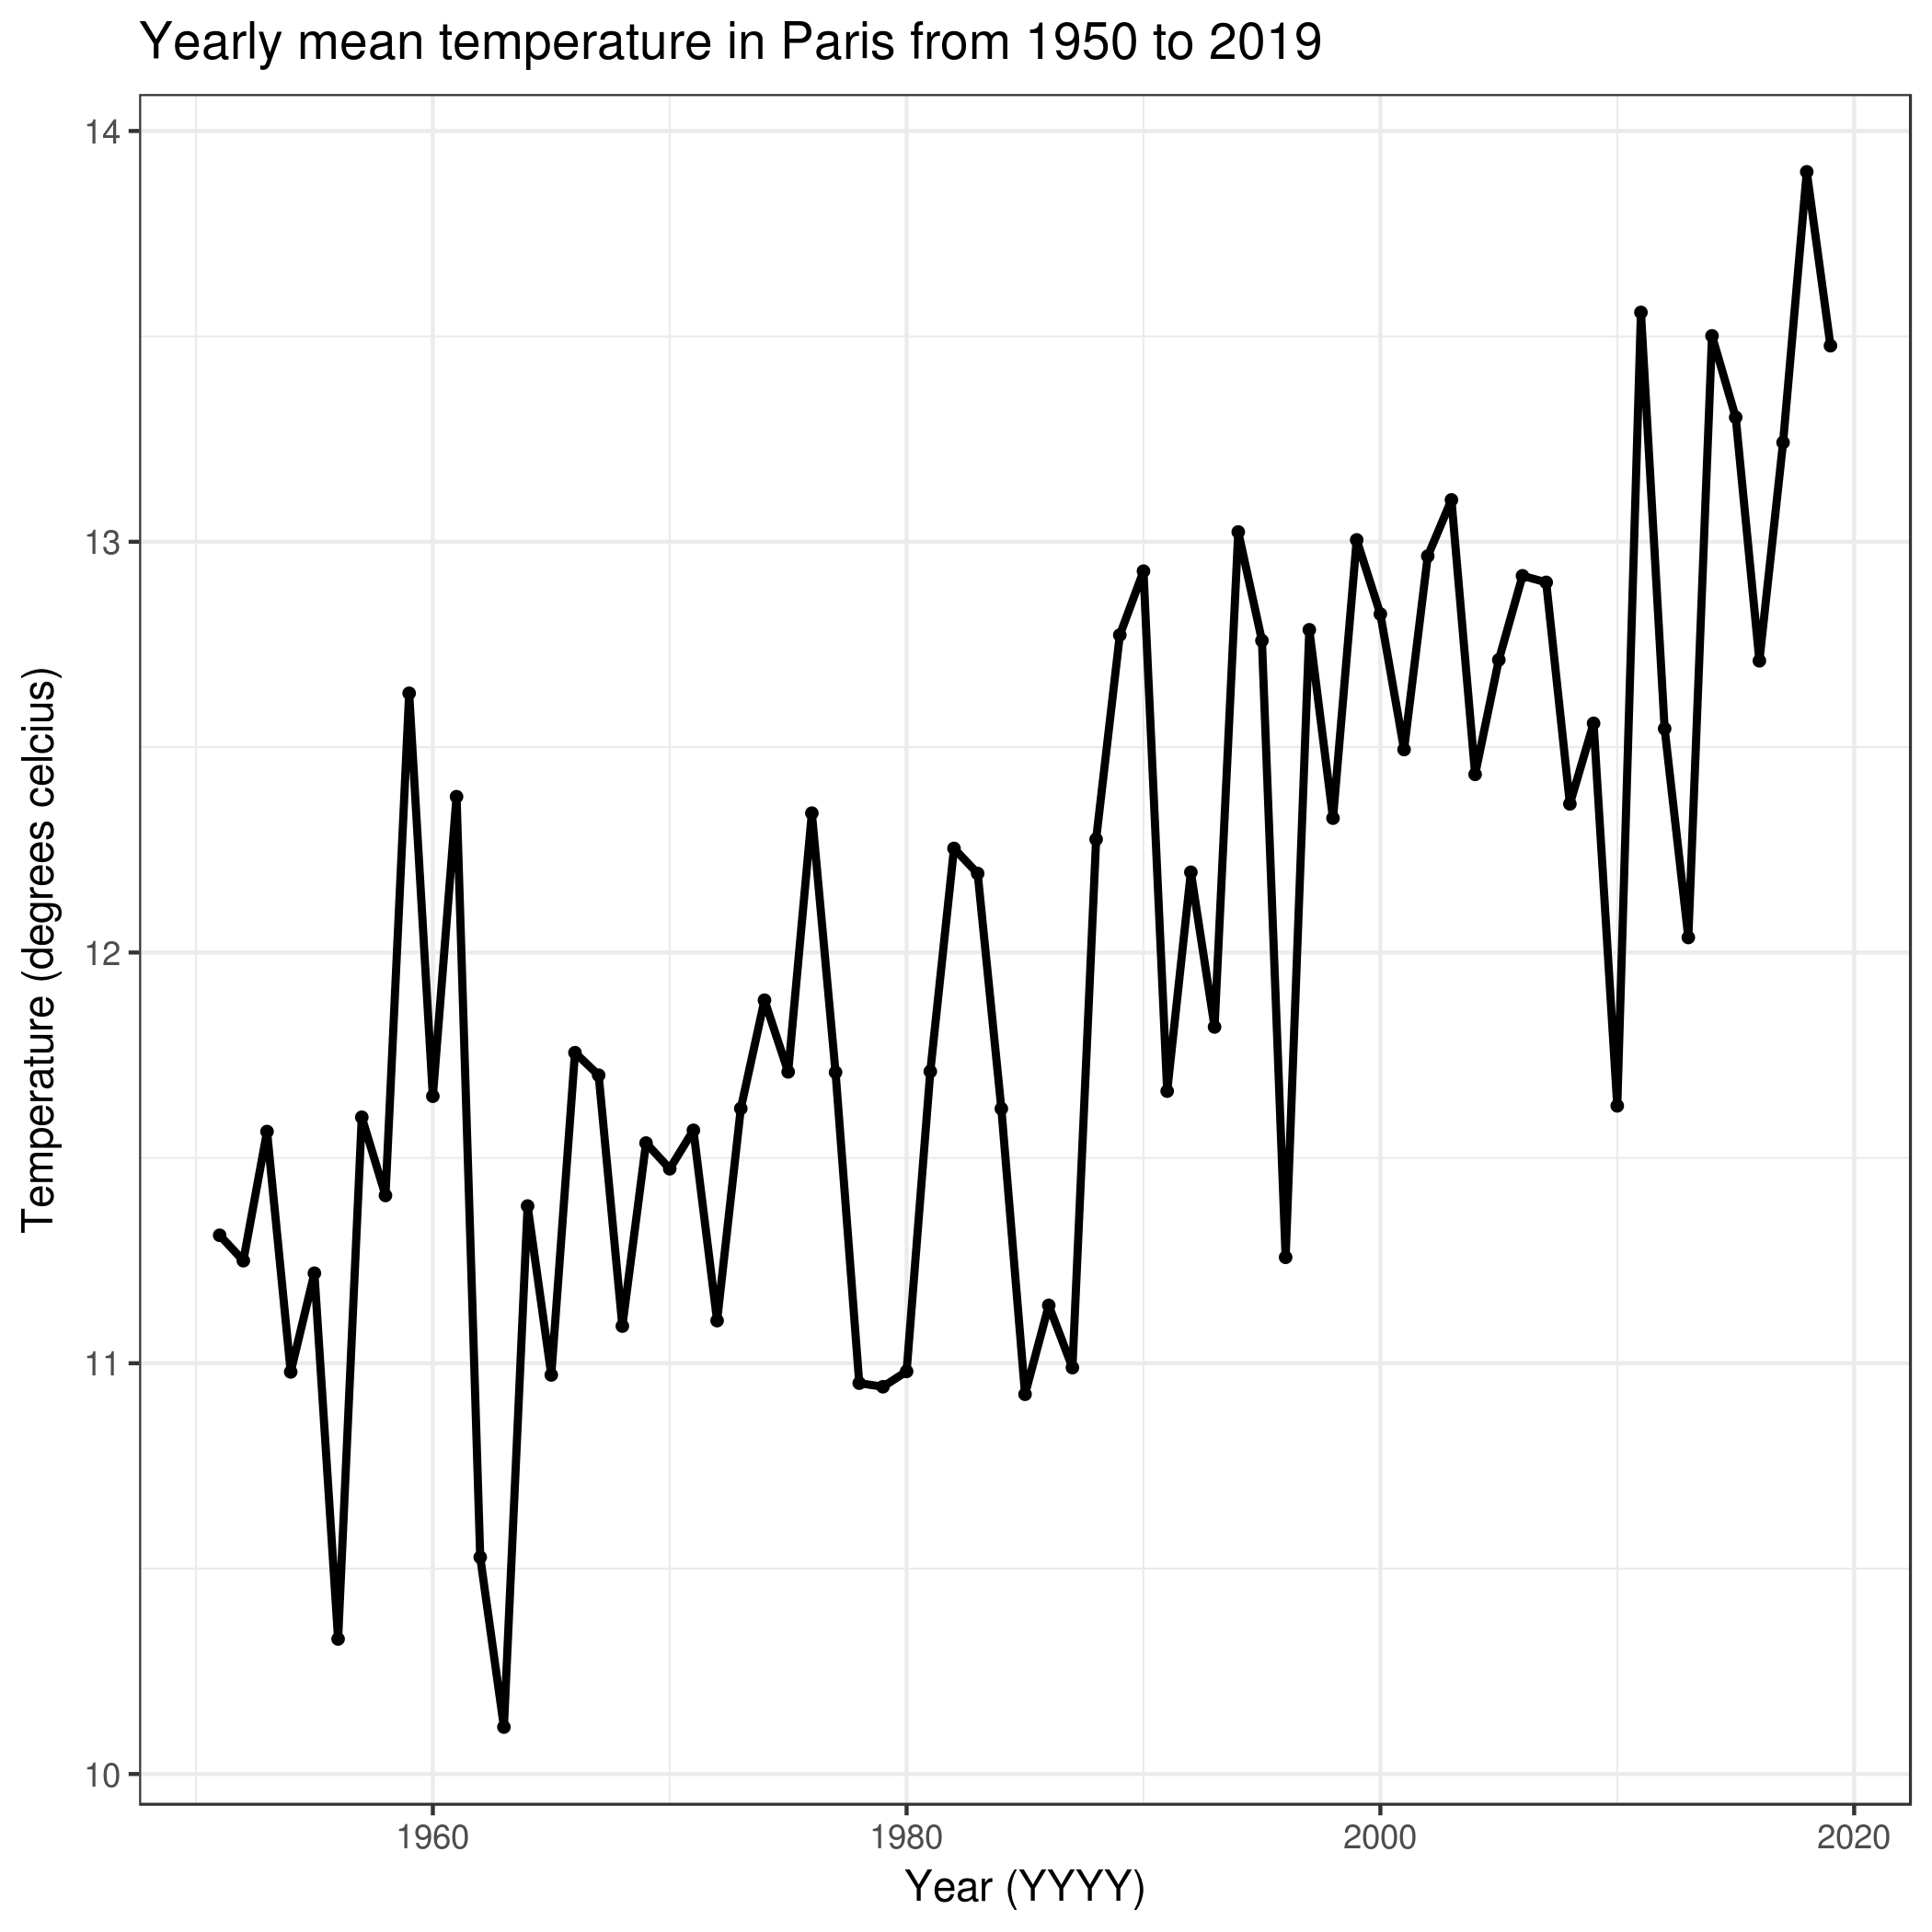 Resulting plot showing Yearly mean temperature in Paris. 